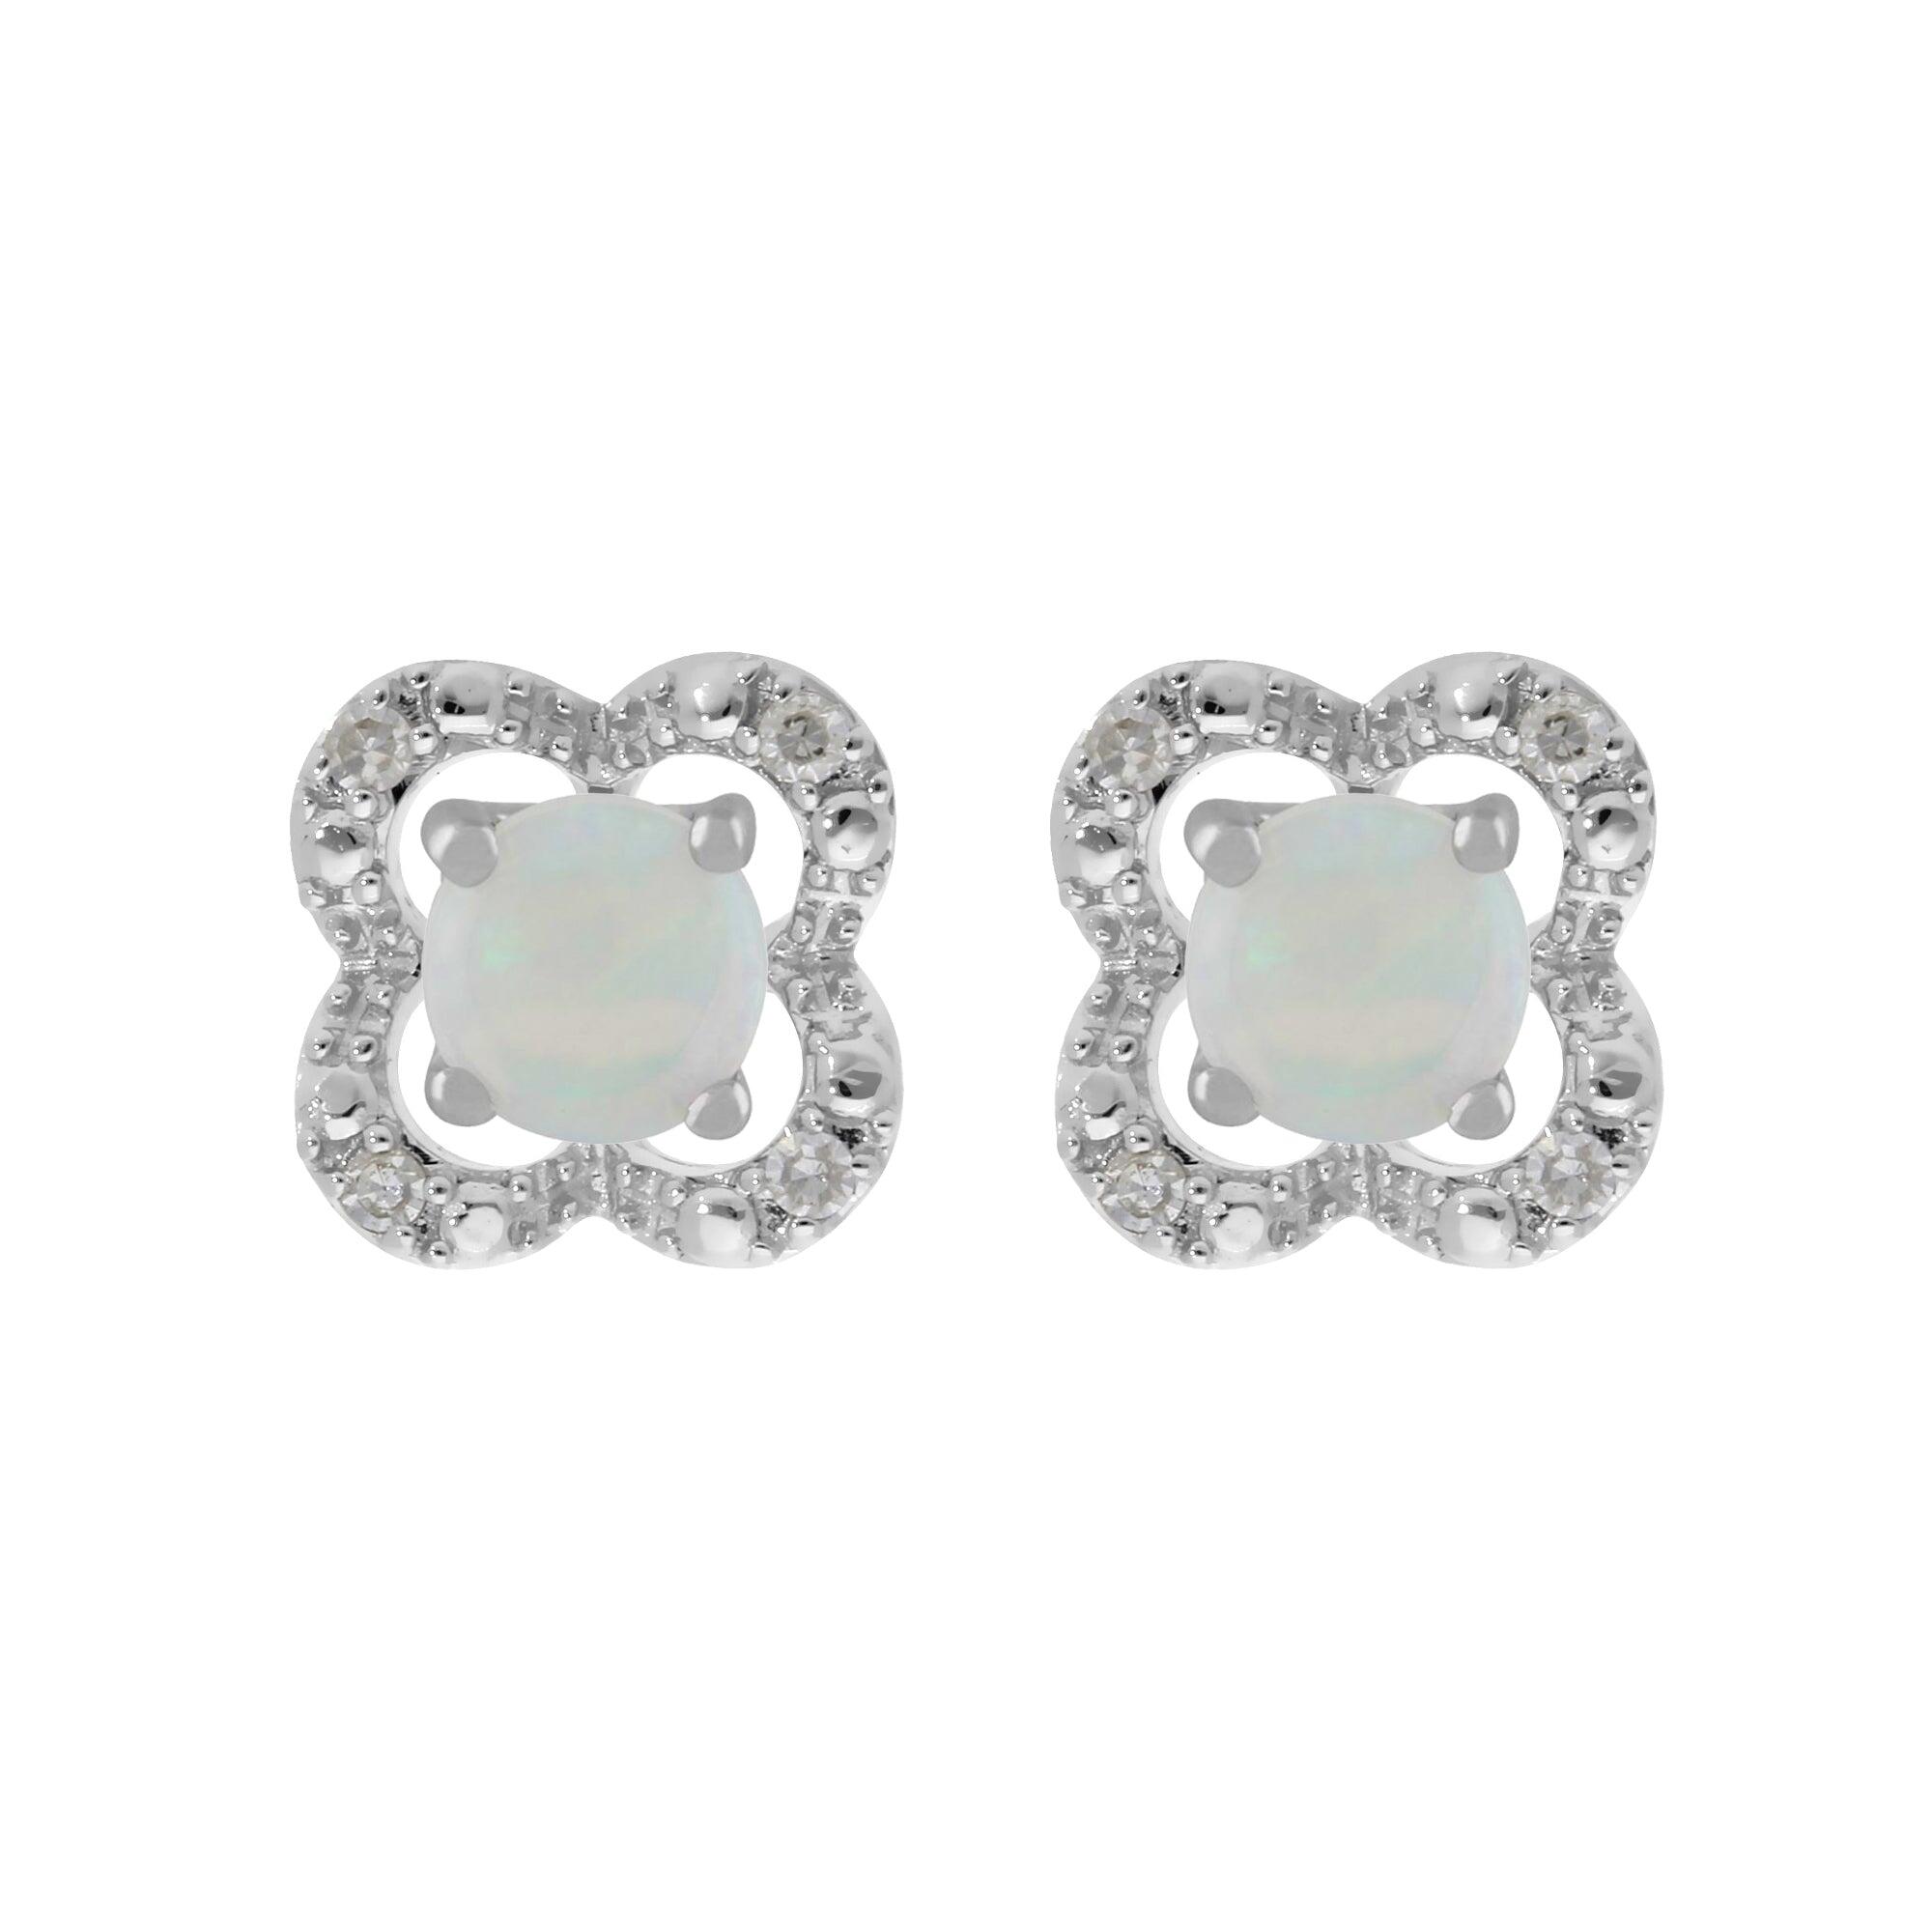 Classic Round Opal Studs with Detachable Diamond Flower Ear Jacket in 9ct White Gold